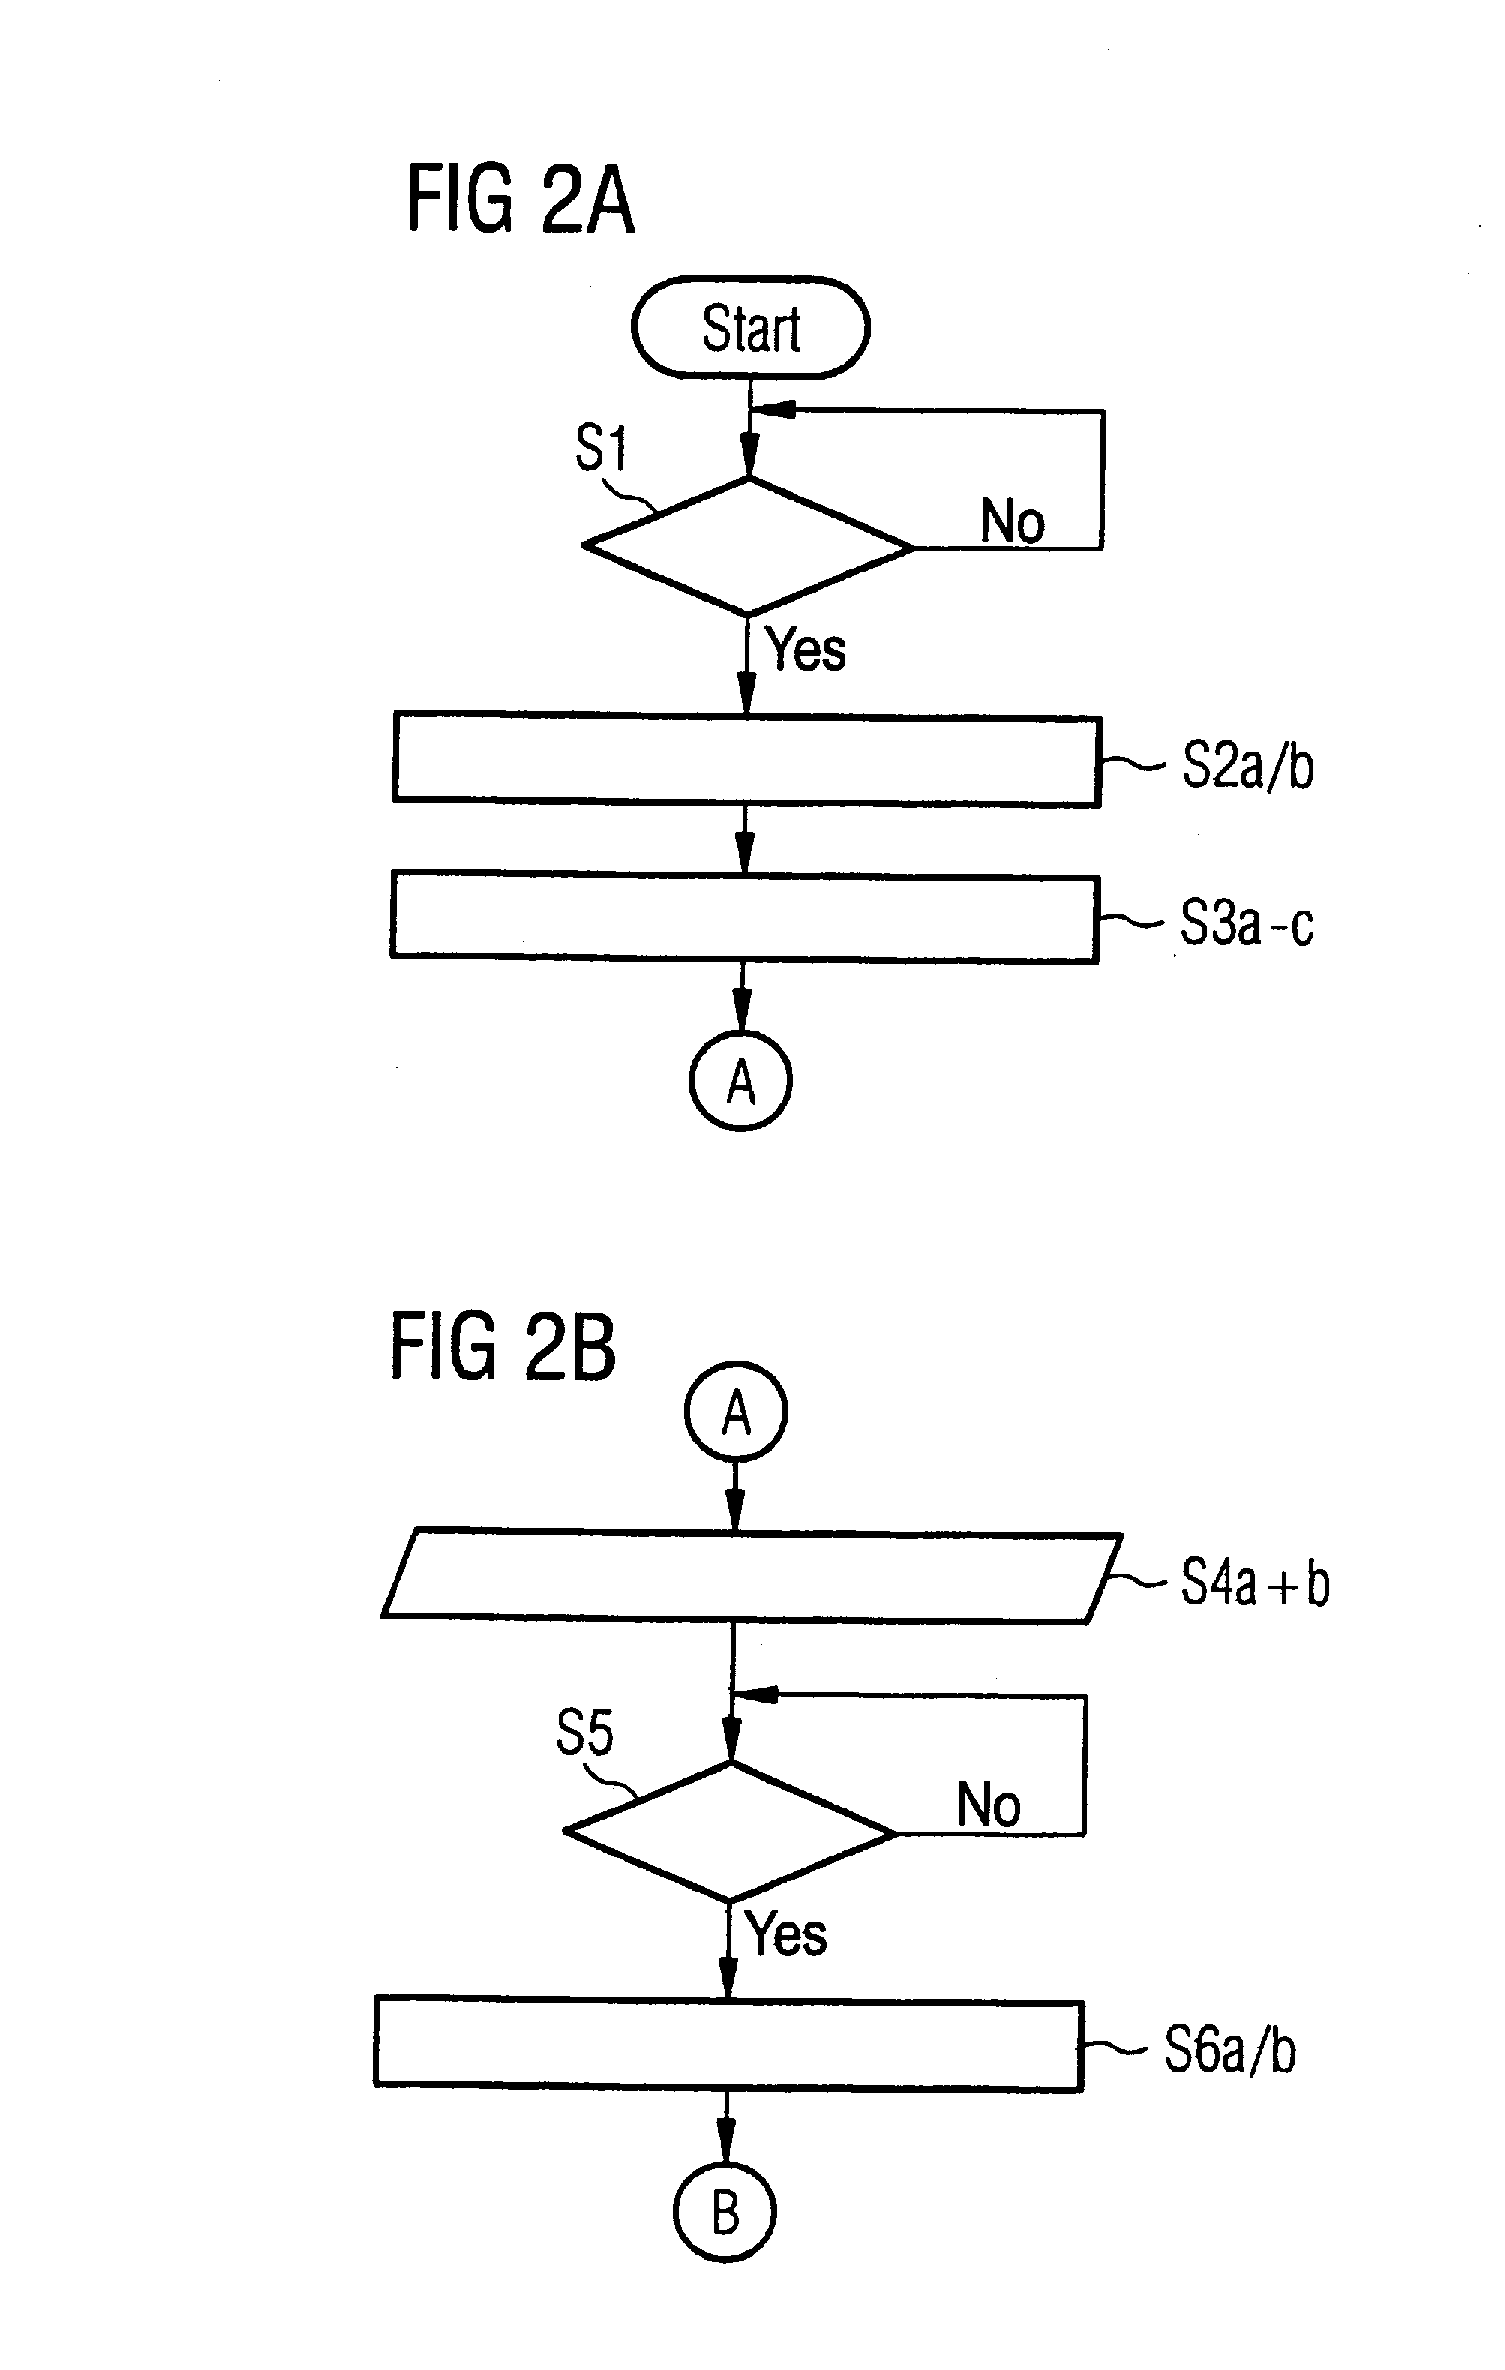 Image acquisition, archiving and rendering system and method for reproducing imaging modality examination parameters used in an initial examination for use in subsequent radiological imaging